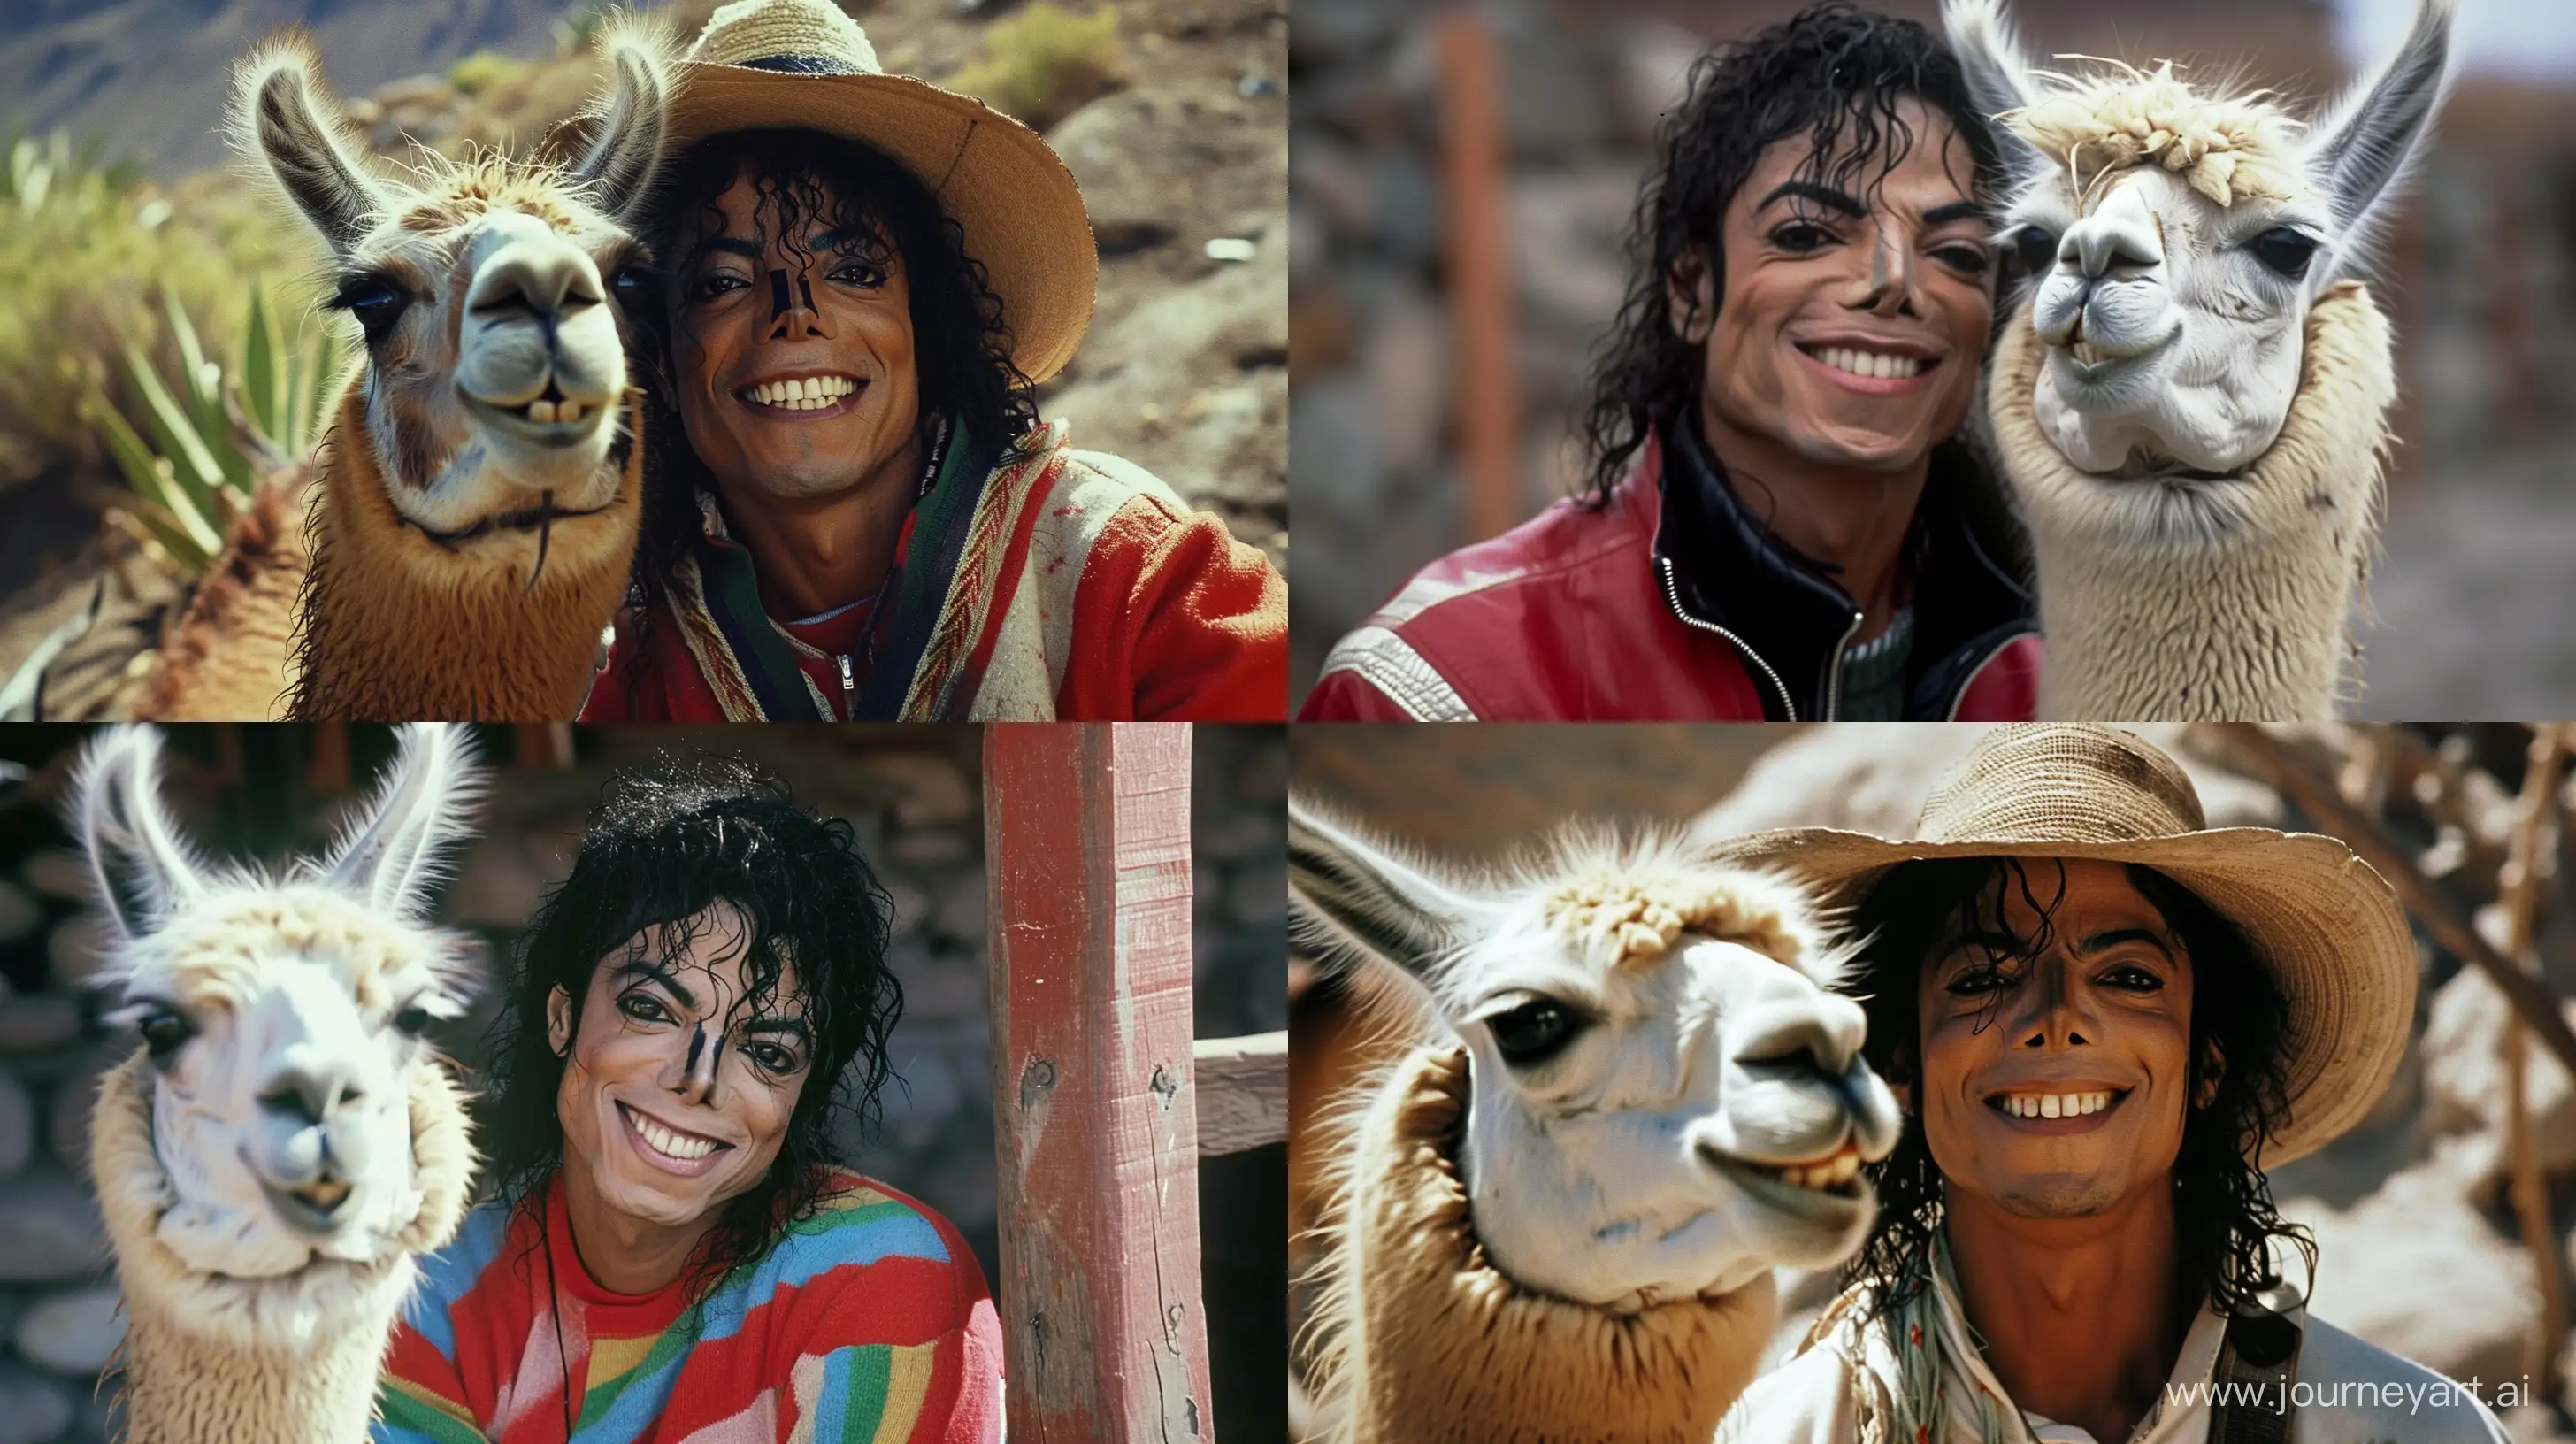 Michael-Jackson-Poses-with-Smiling-Llama-in-1985